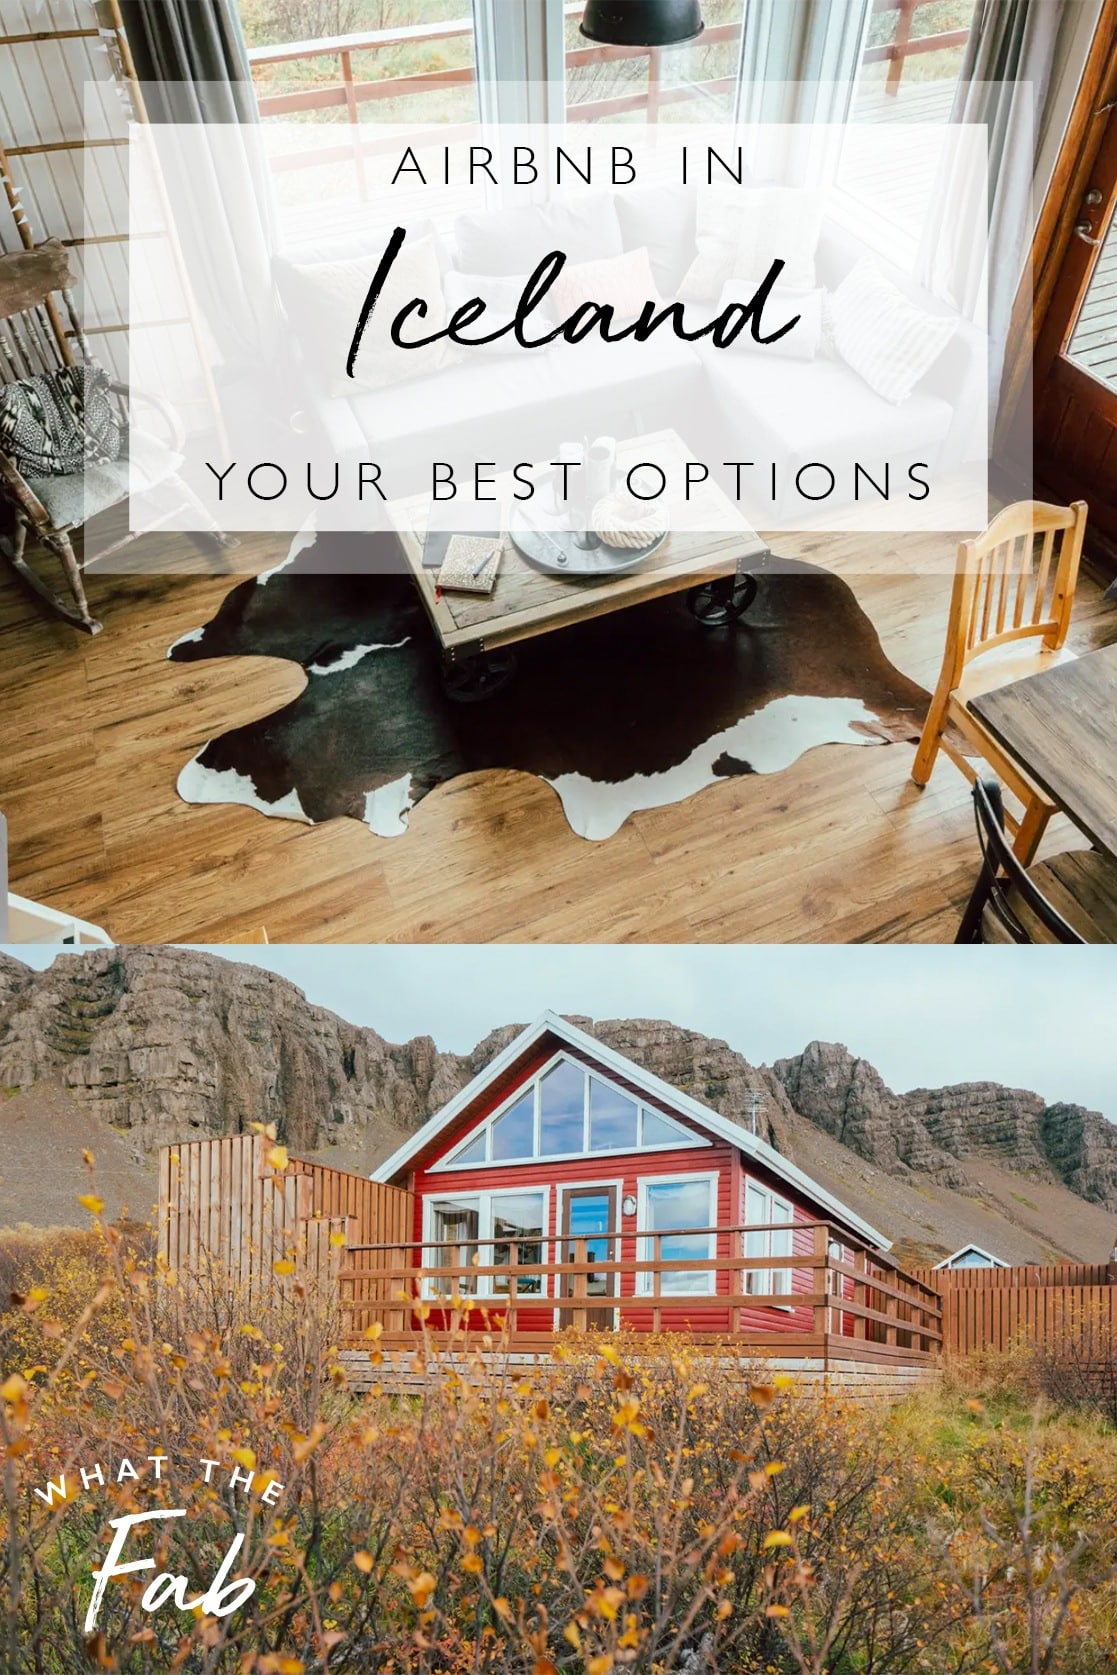 Airbnb Iceland, best options by travel blogger What The Fab